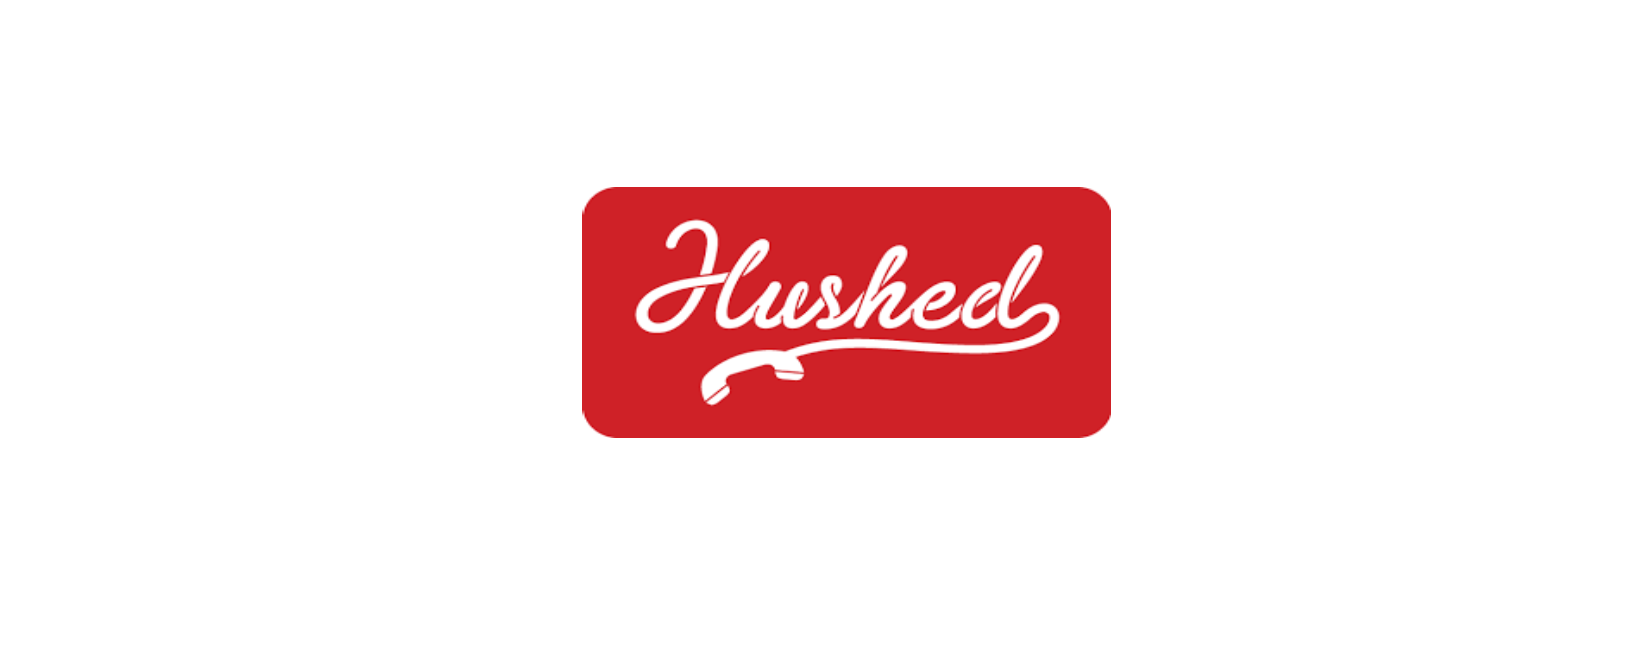 Hushed Discount Code 2022